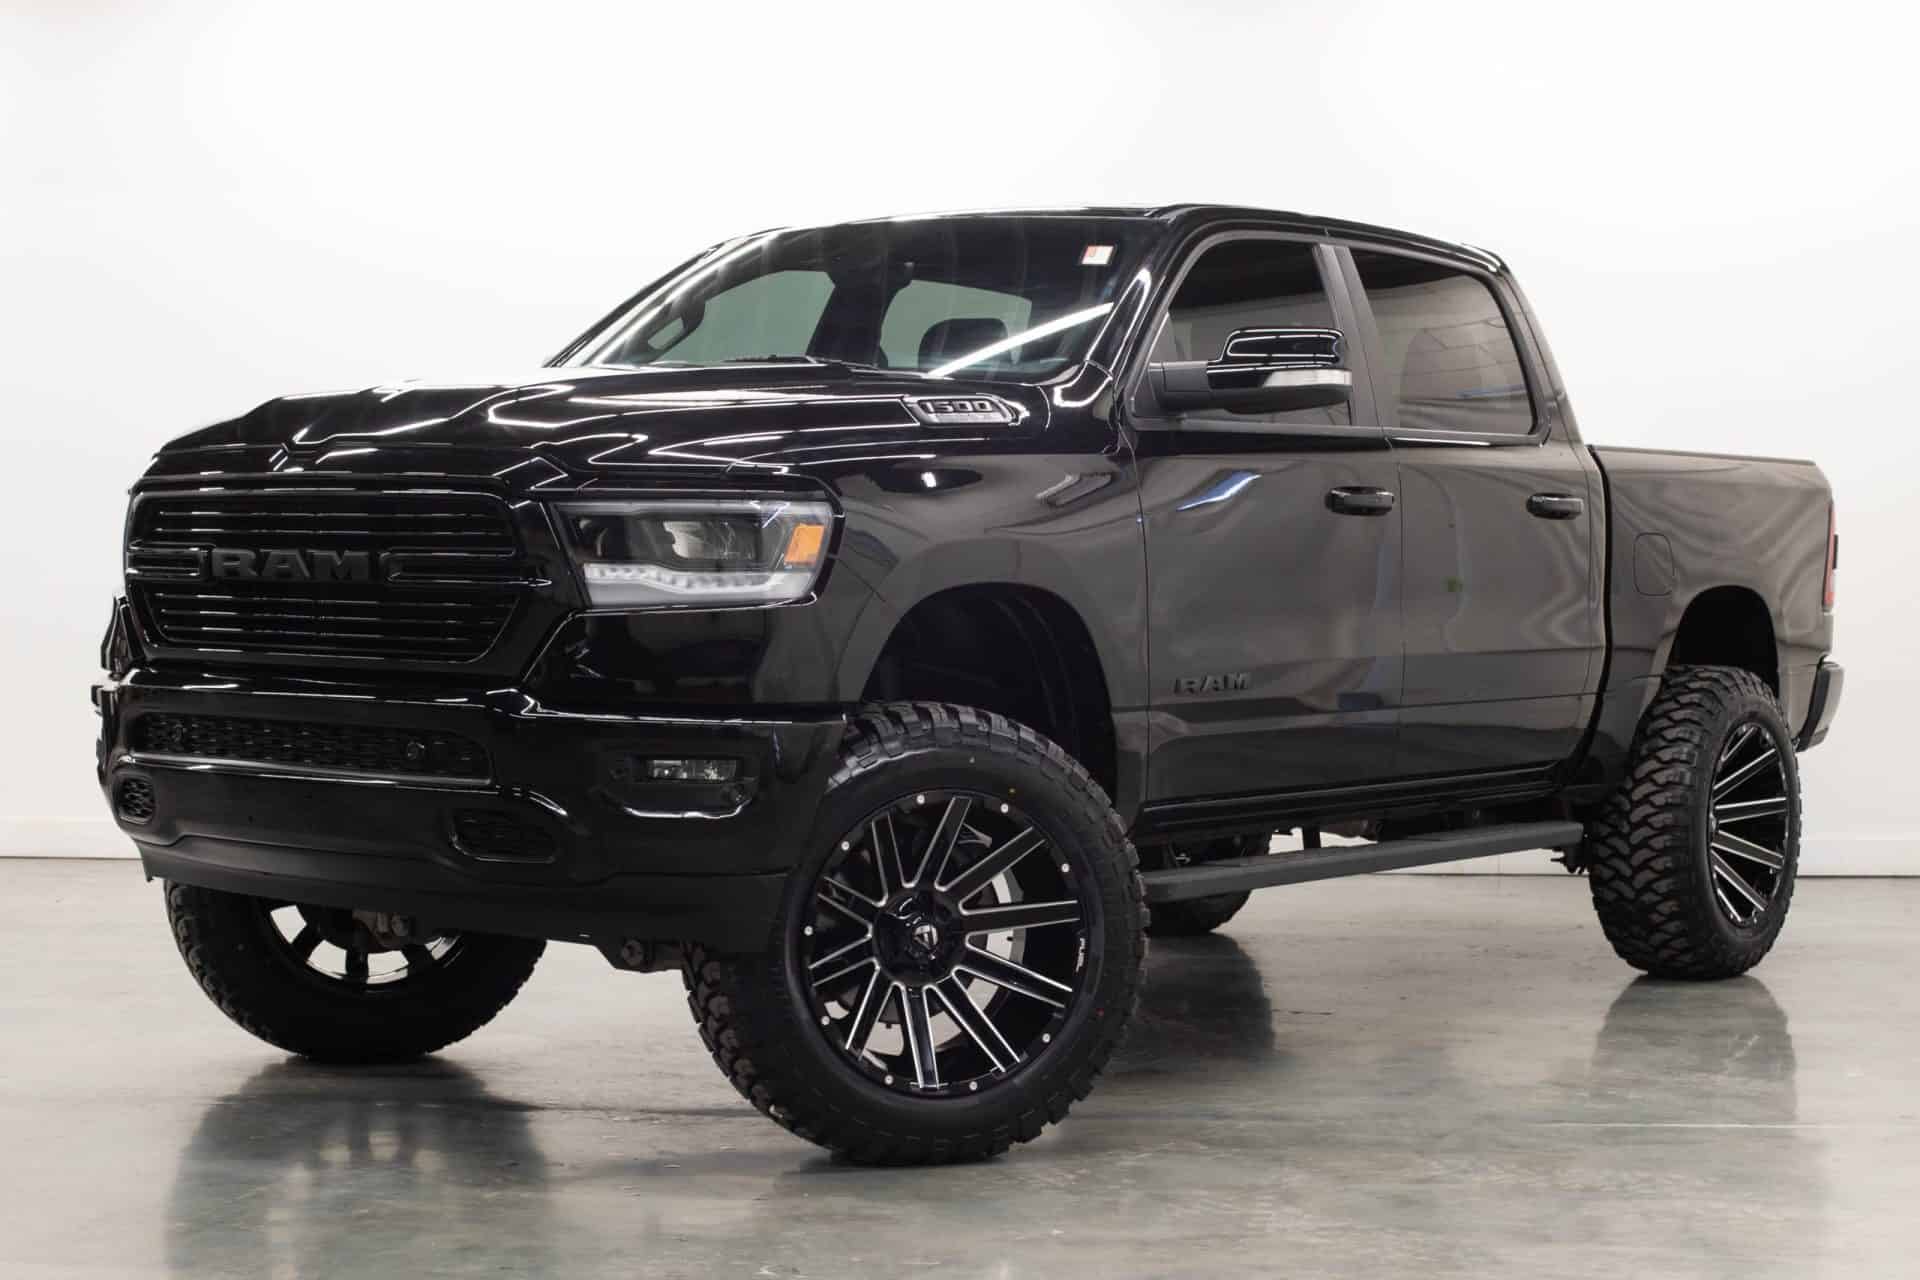 Lifted Ram Trucks for Sale